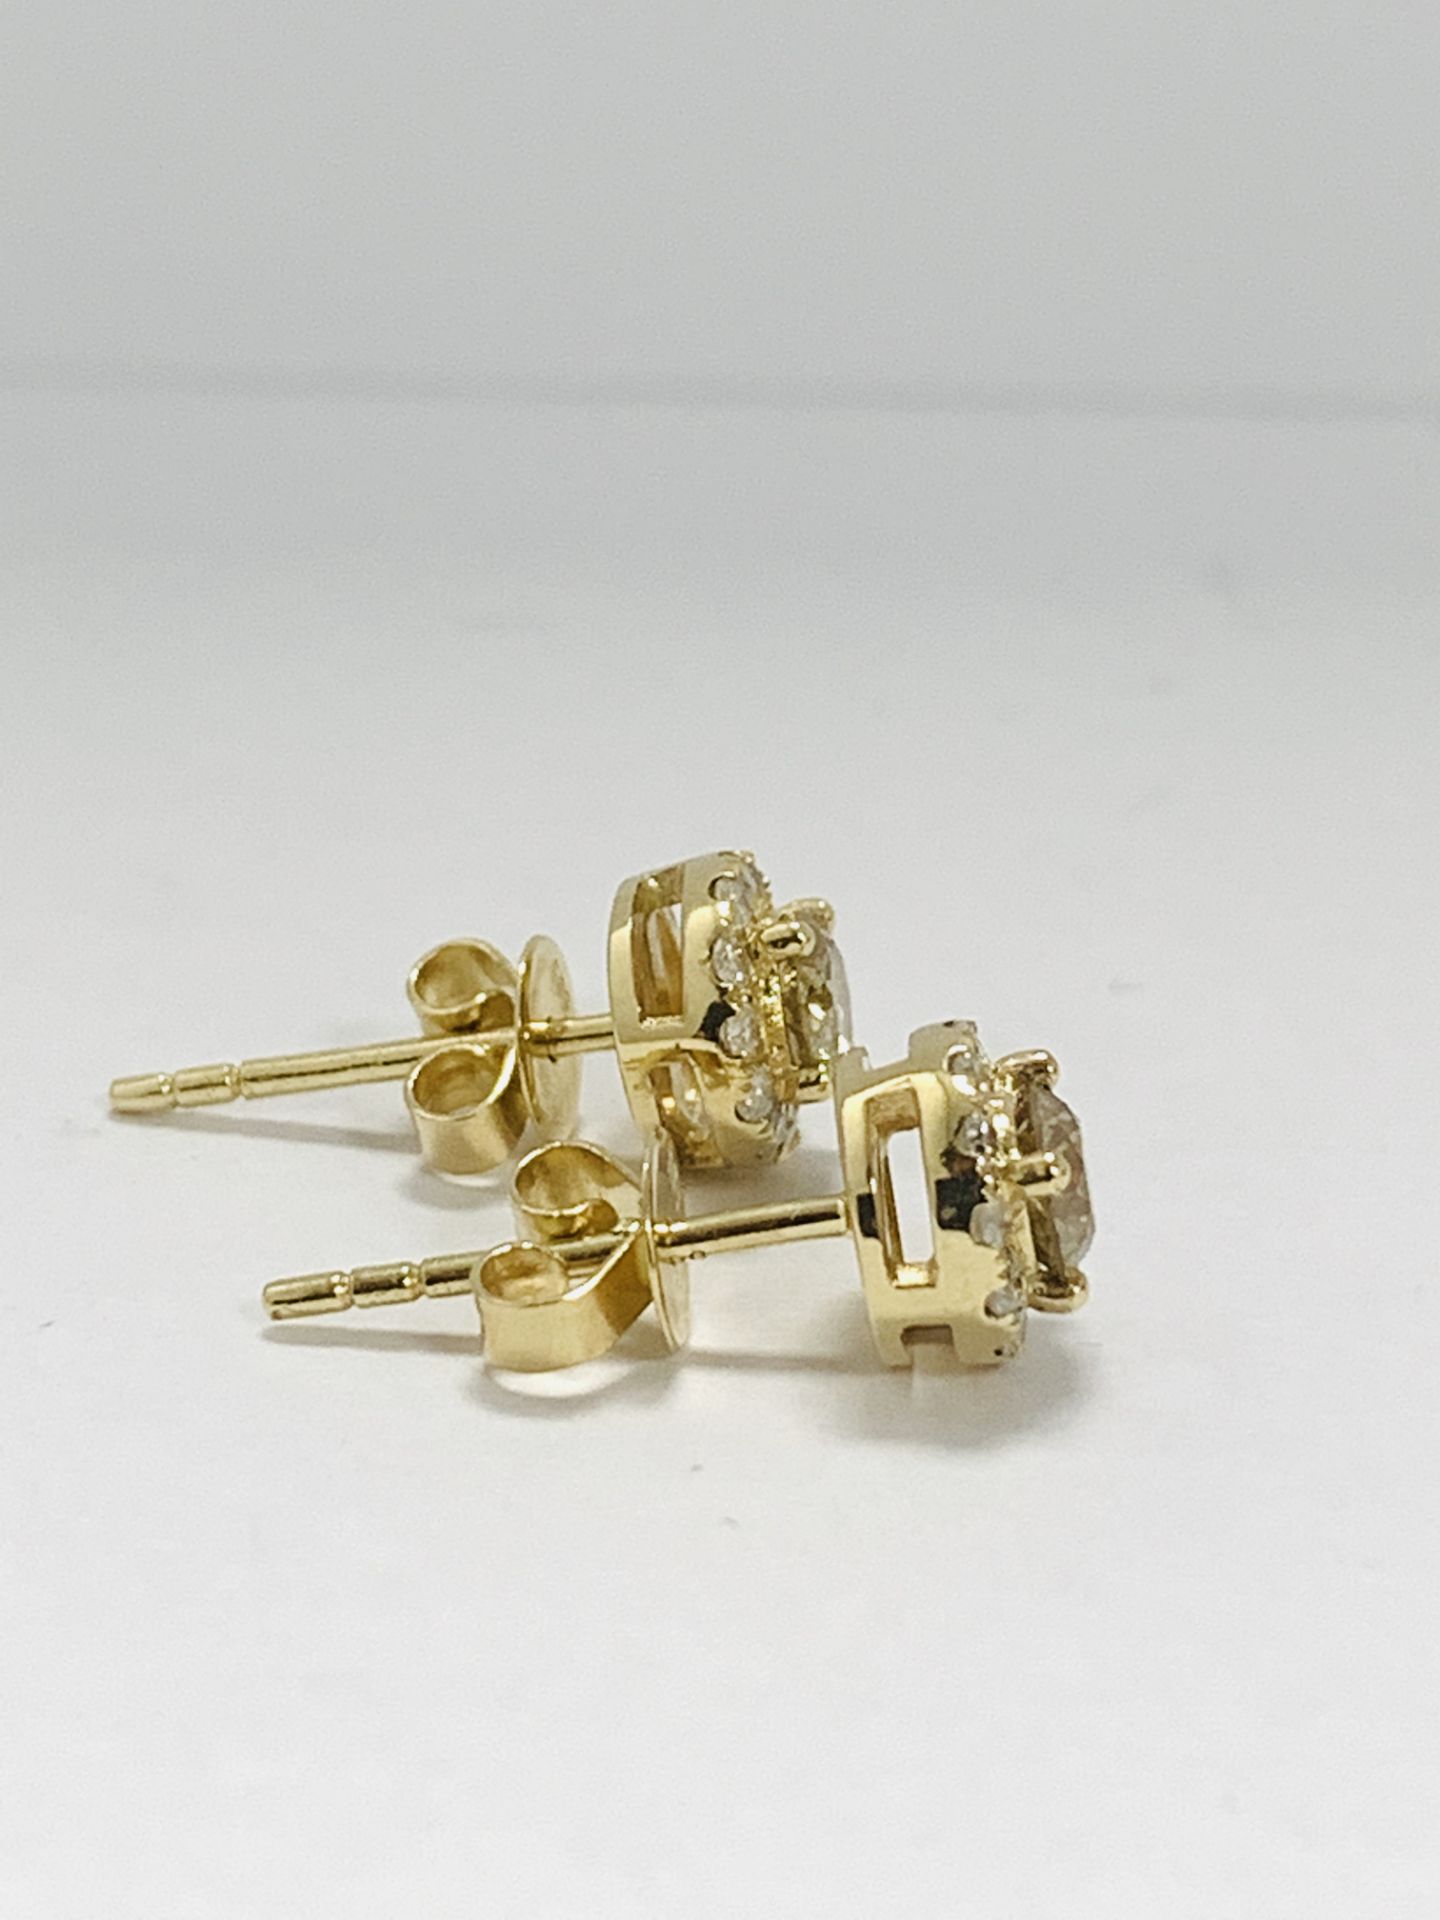 14K Yellow Gold Pair Of Earrings - Image 4 of 6